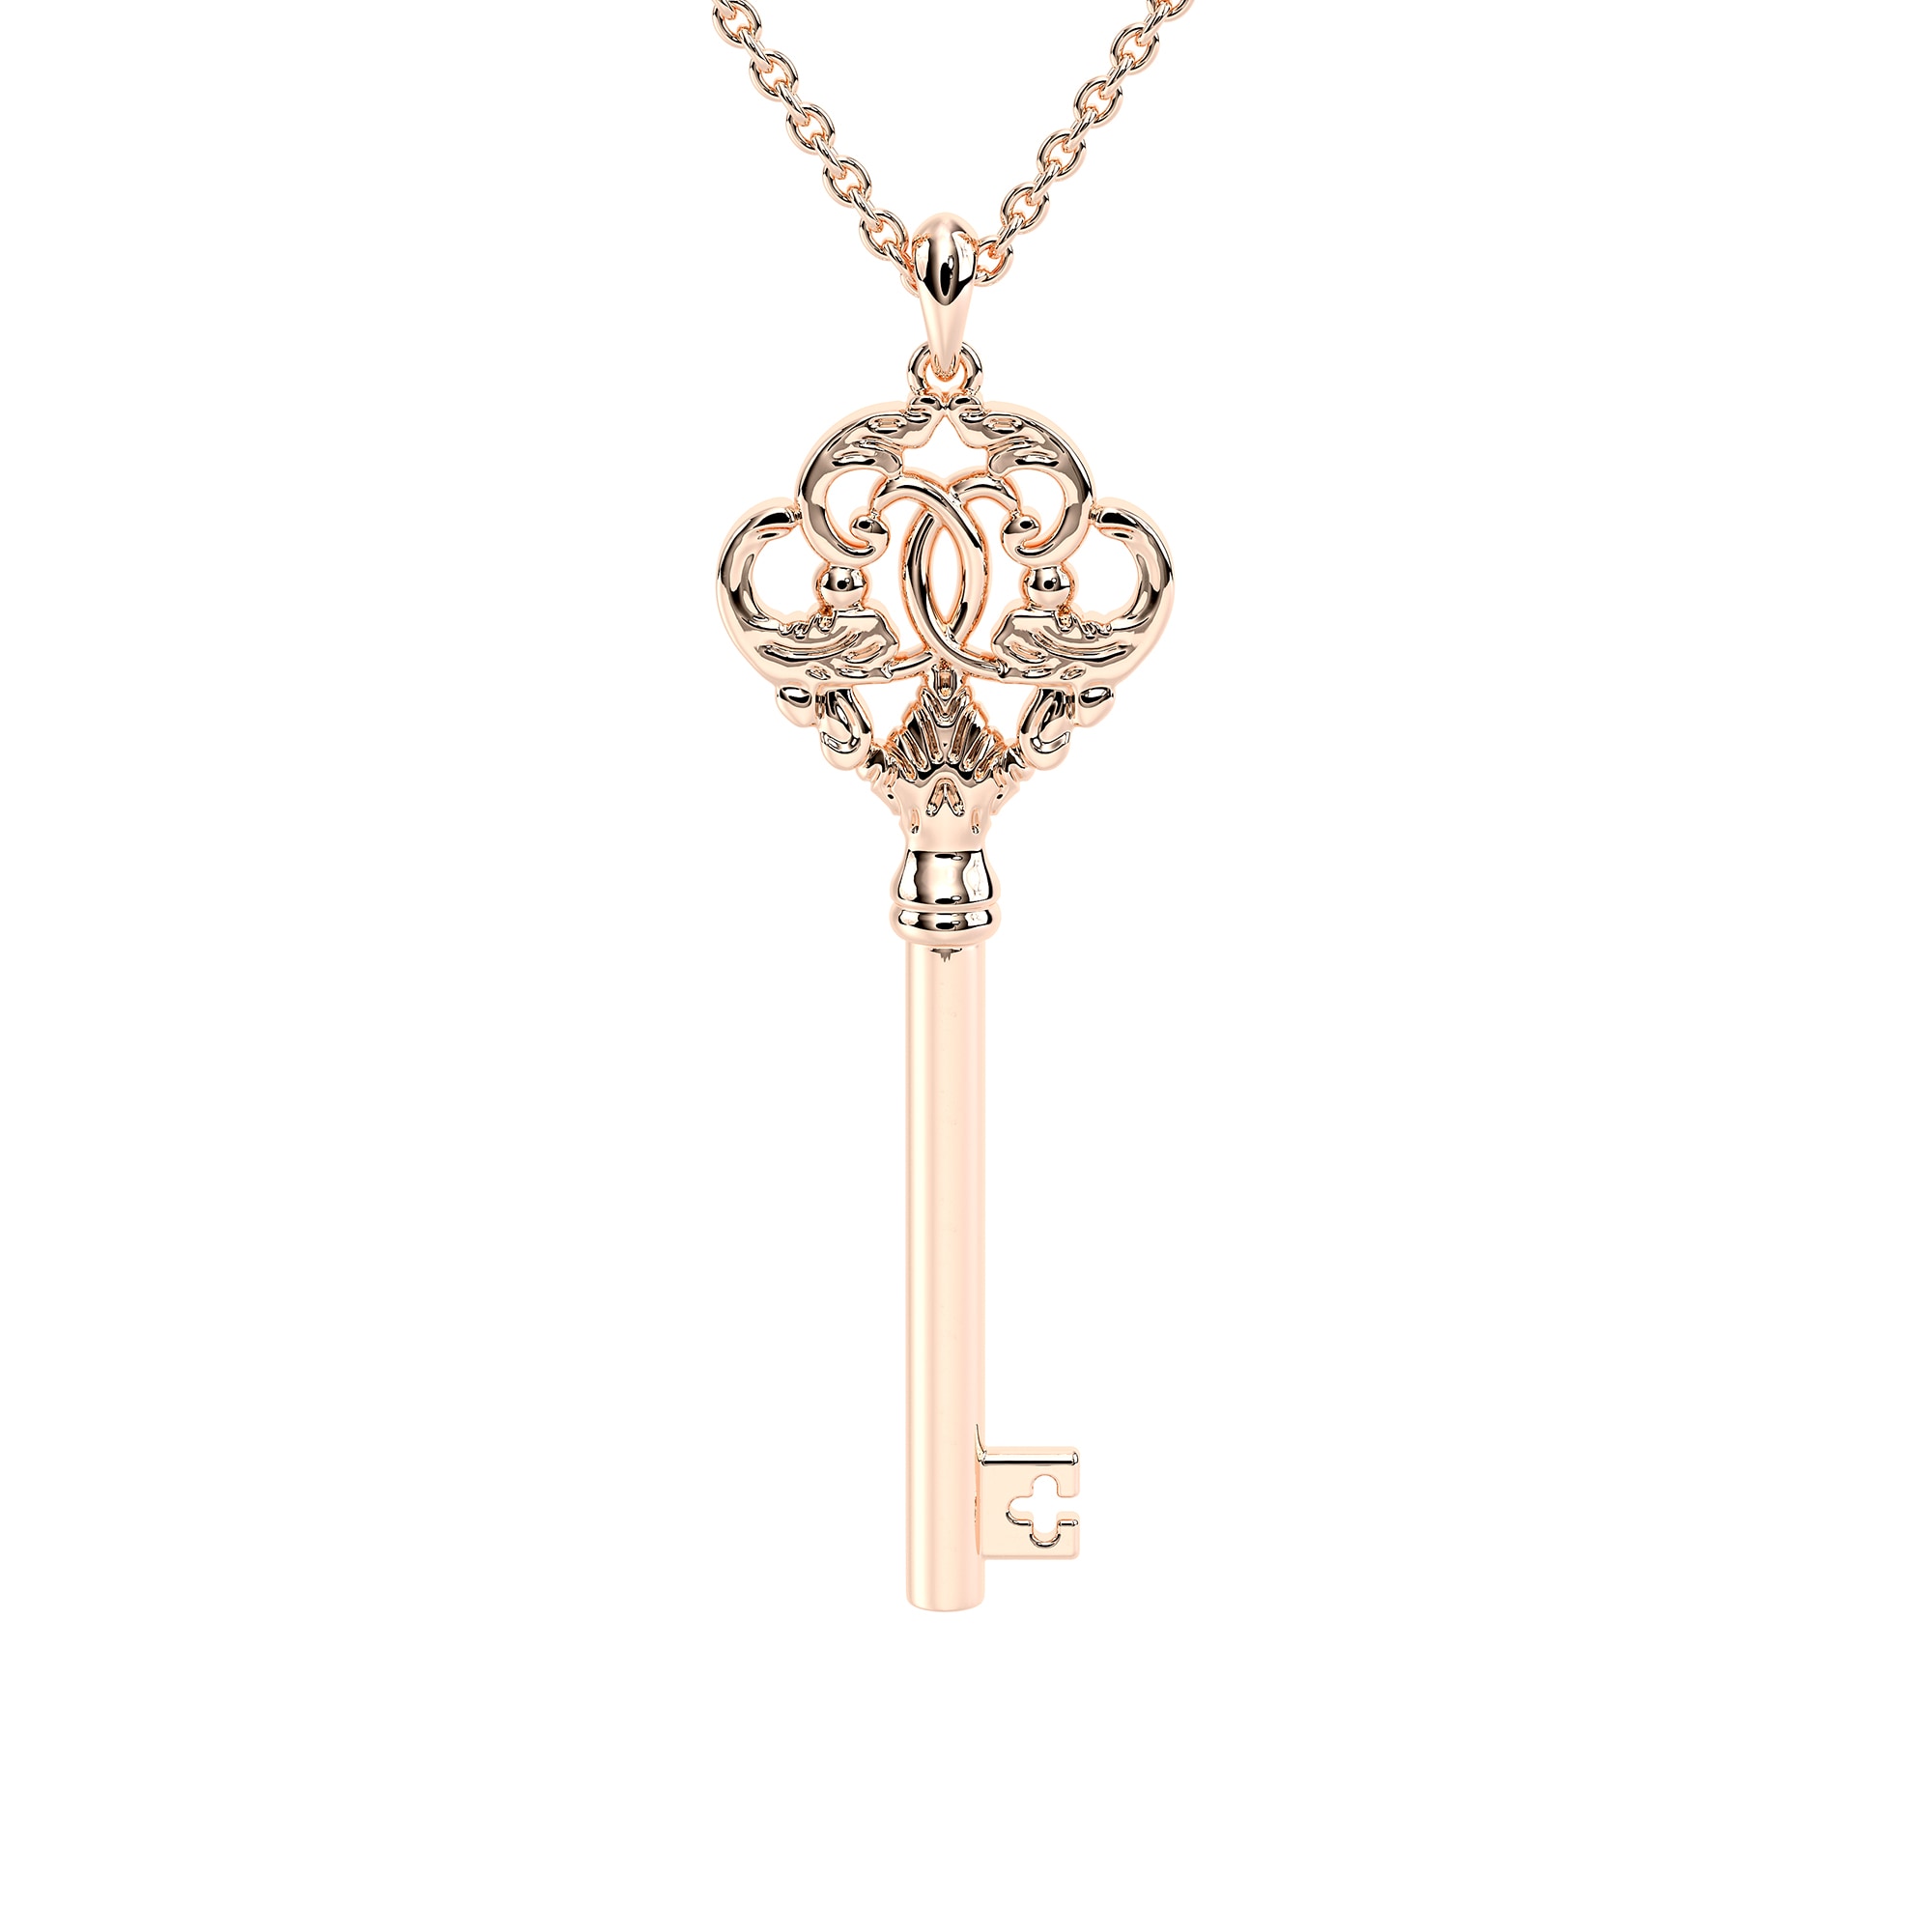 Vintage Fancy Necklace 14K Rose Gold Key Pendant Fine Jewelry for Her - 14K Rose Gold - Without Chain